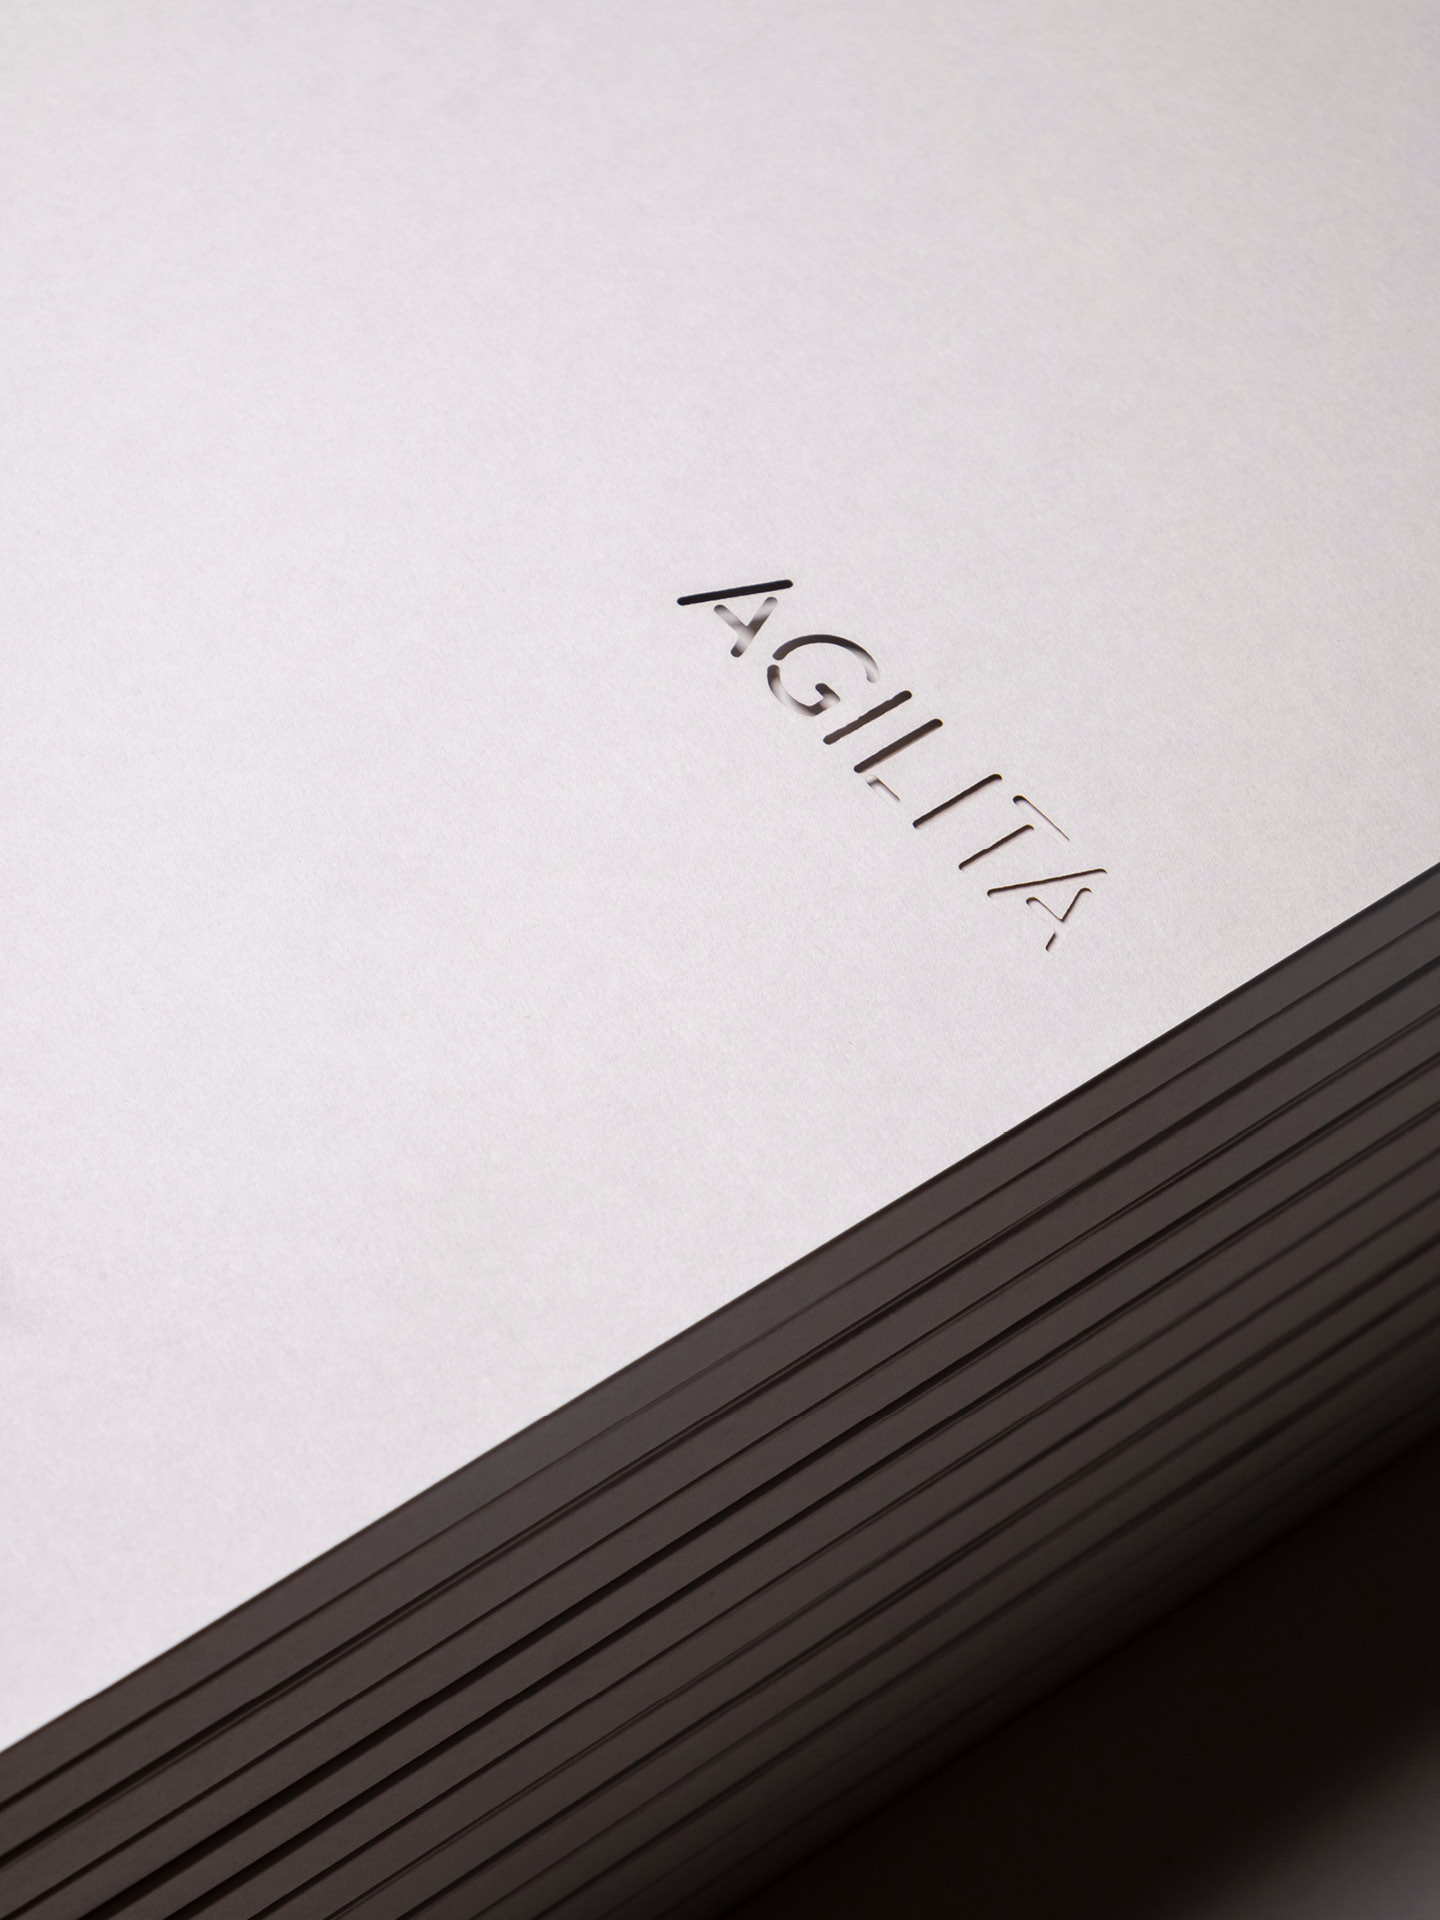 A detailed photo of the Agilita logotype die cut with shadow